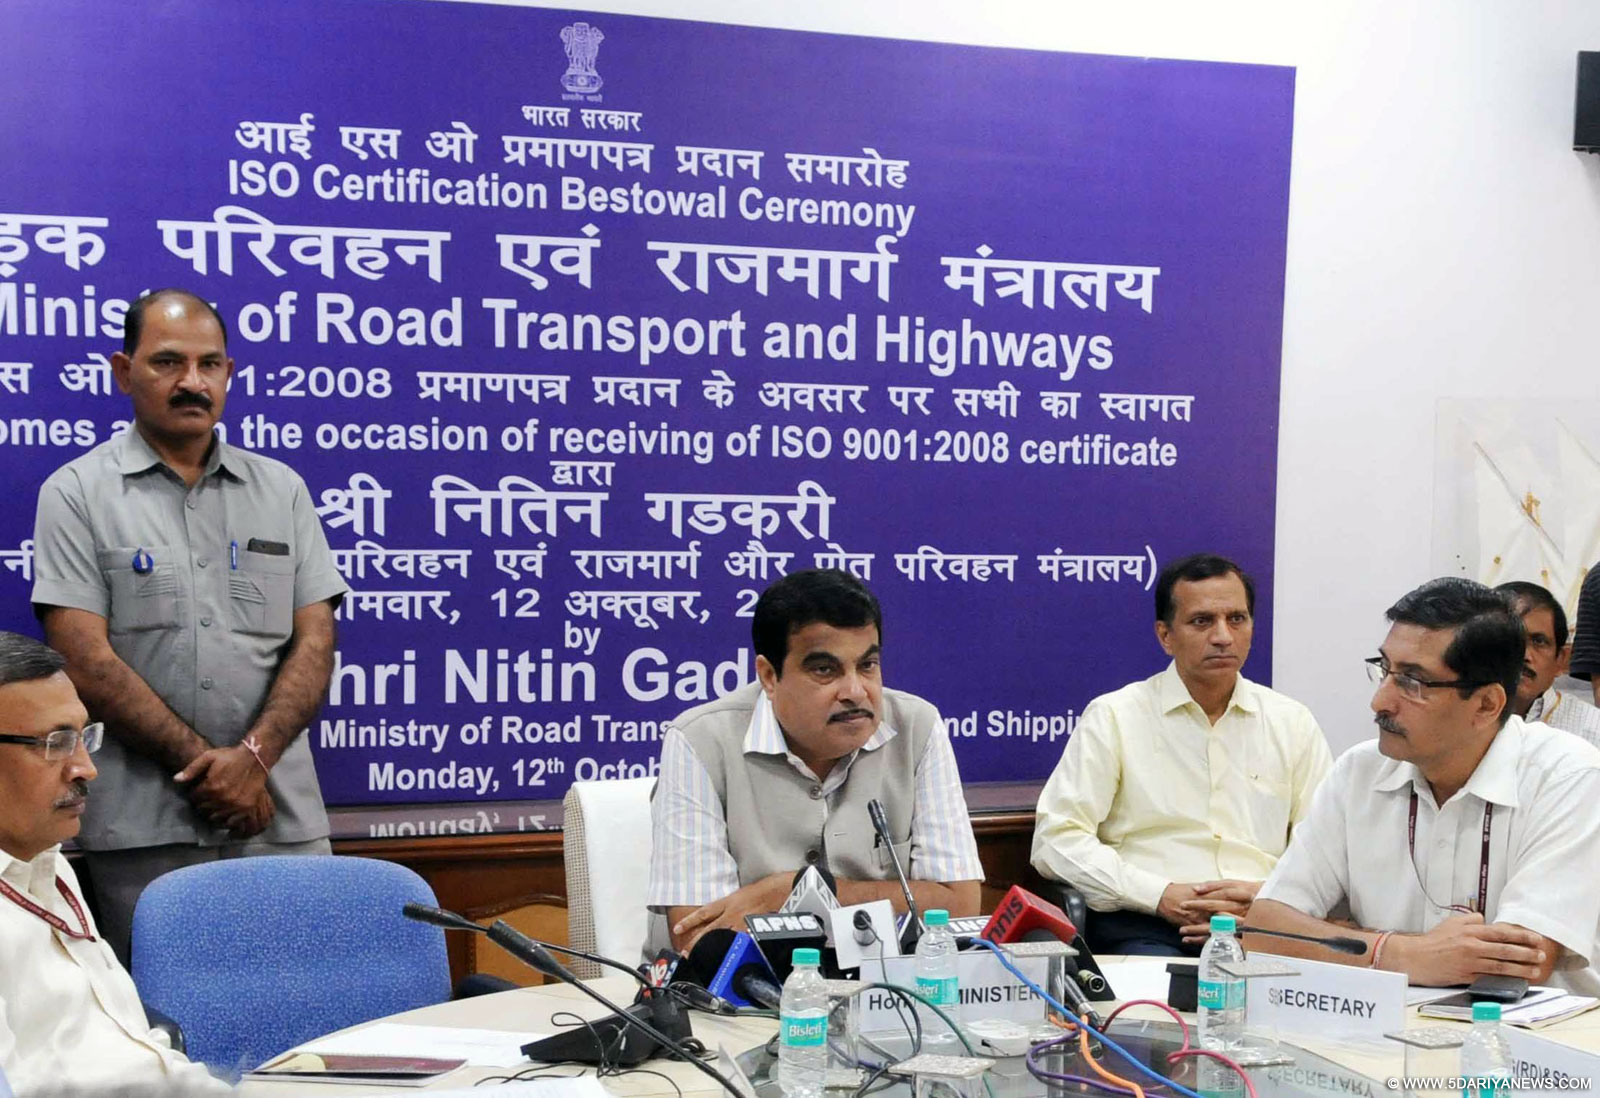 The Union Minister for Road Transport & Highways and Shipping, Shri Nitin Gadkari addressing at the receiving of the ISO 9001: 2008 Certificate, acquired by the Ministry of Road Transport & Highways, in New Delhi on October 12, 2015. The Secretary, Ministry of Road Transport and Highways, Shri Vijay Chibber is also seen.